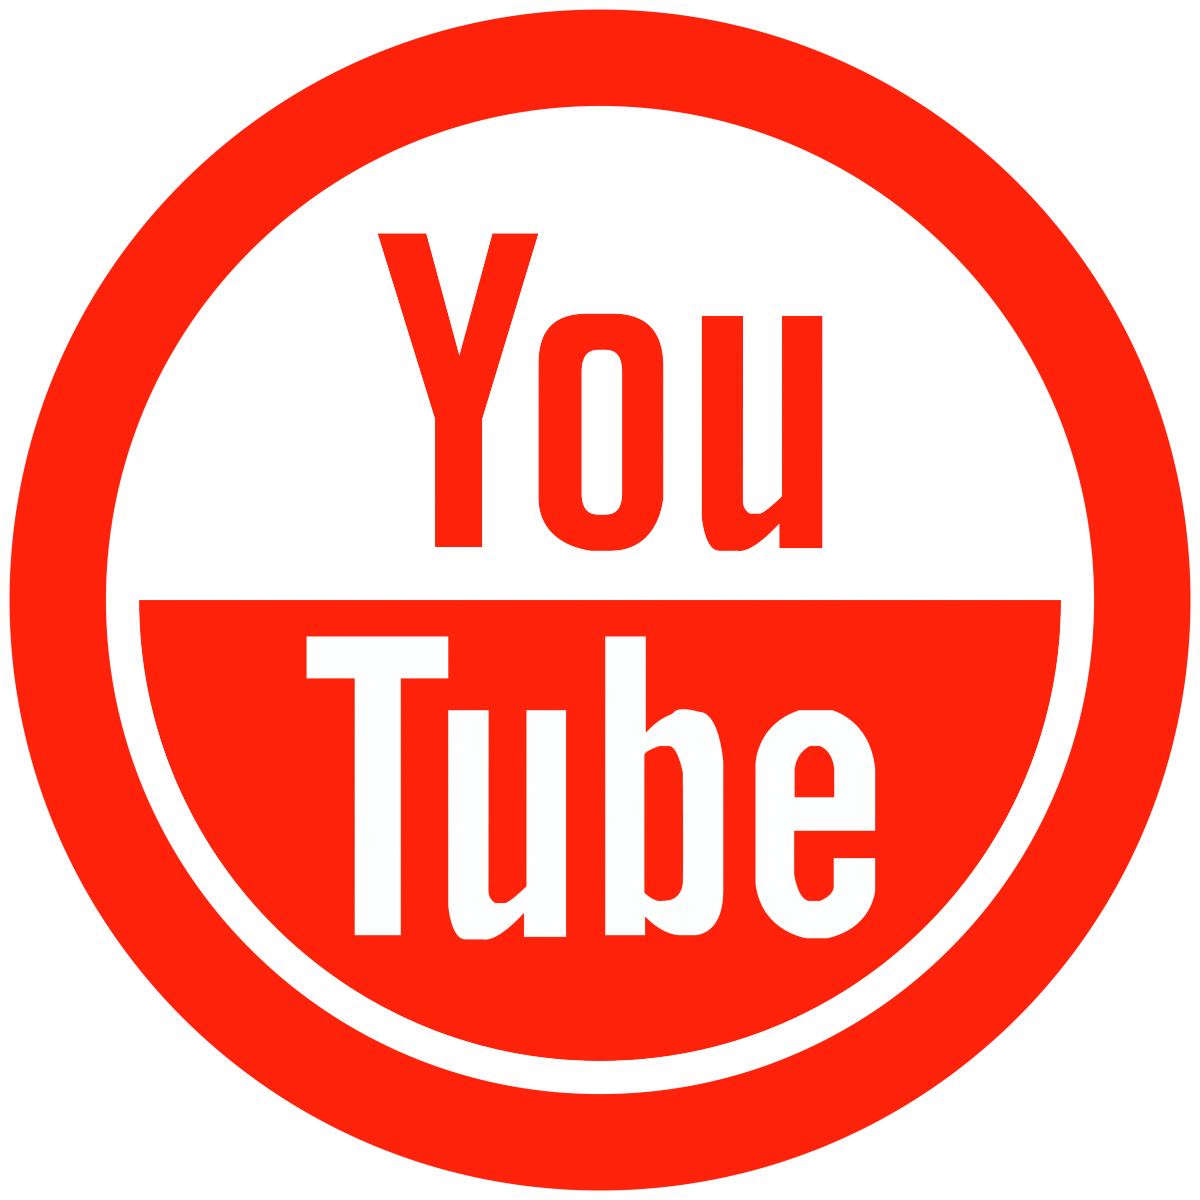 Download Youtube Icon Red Circle PNG Image with No Background - PNGkey.com